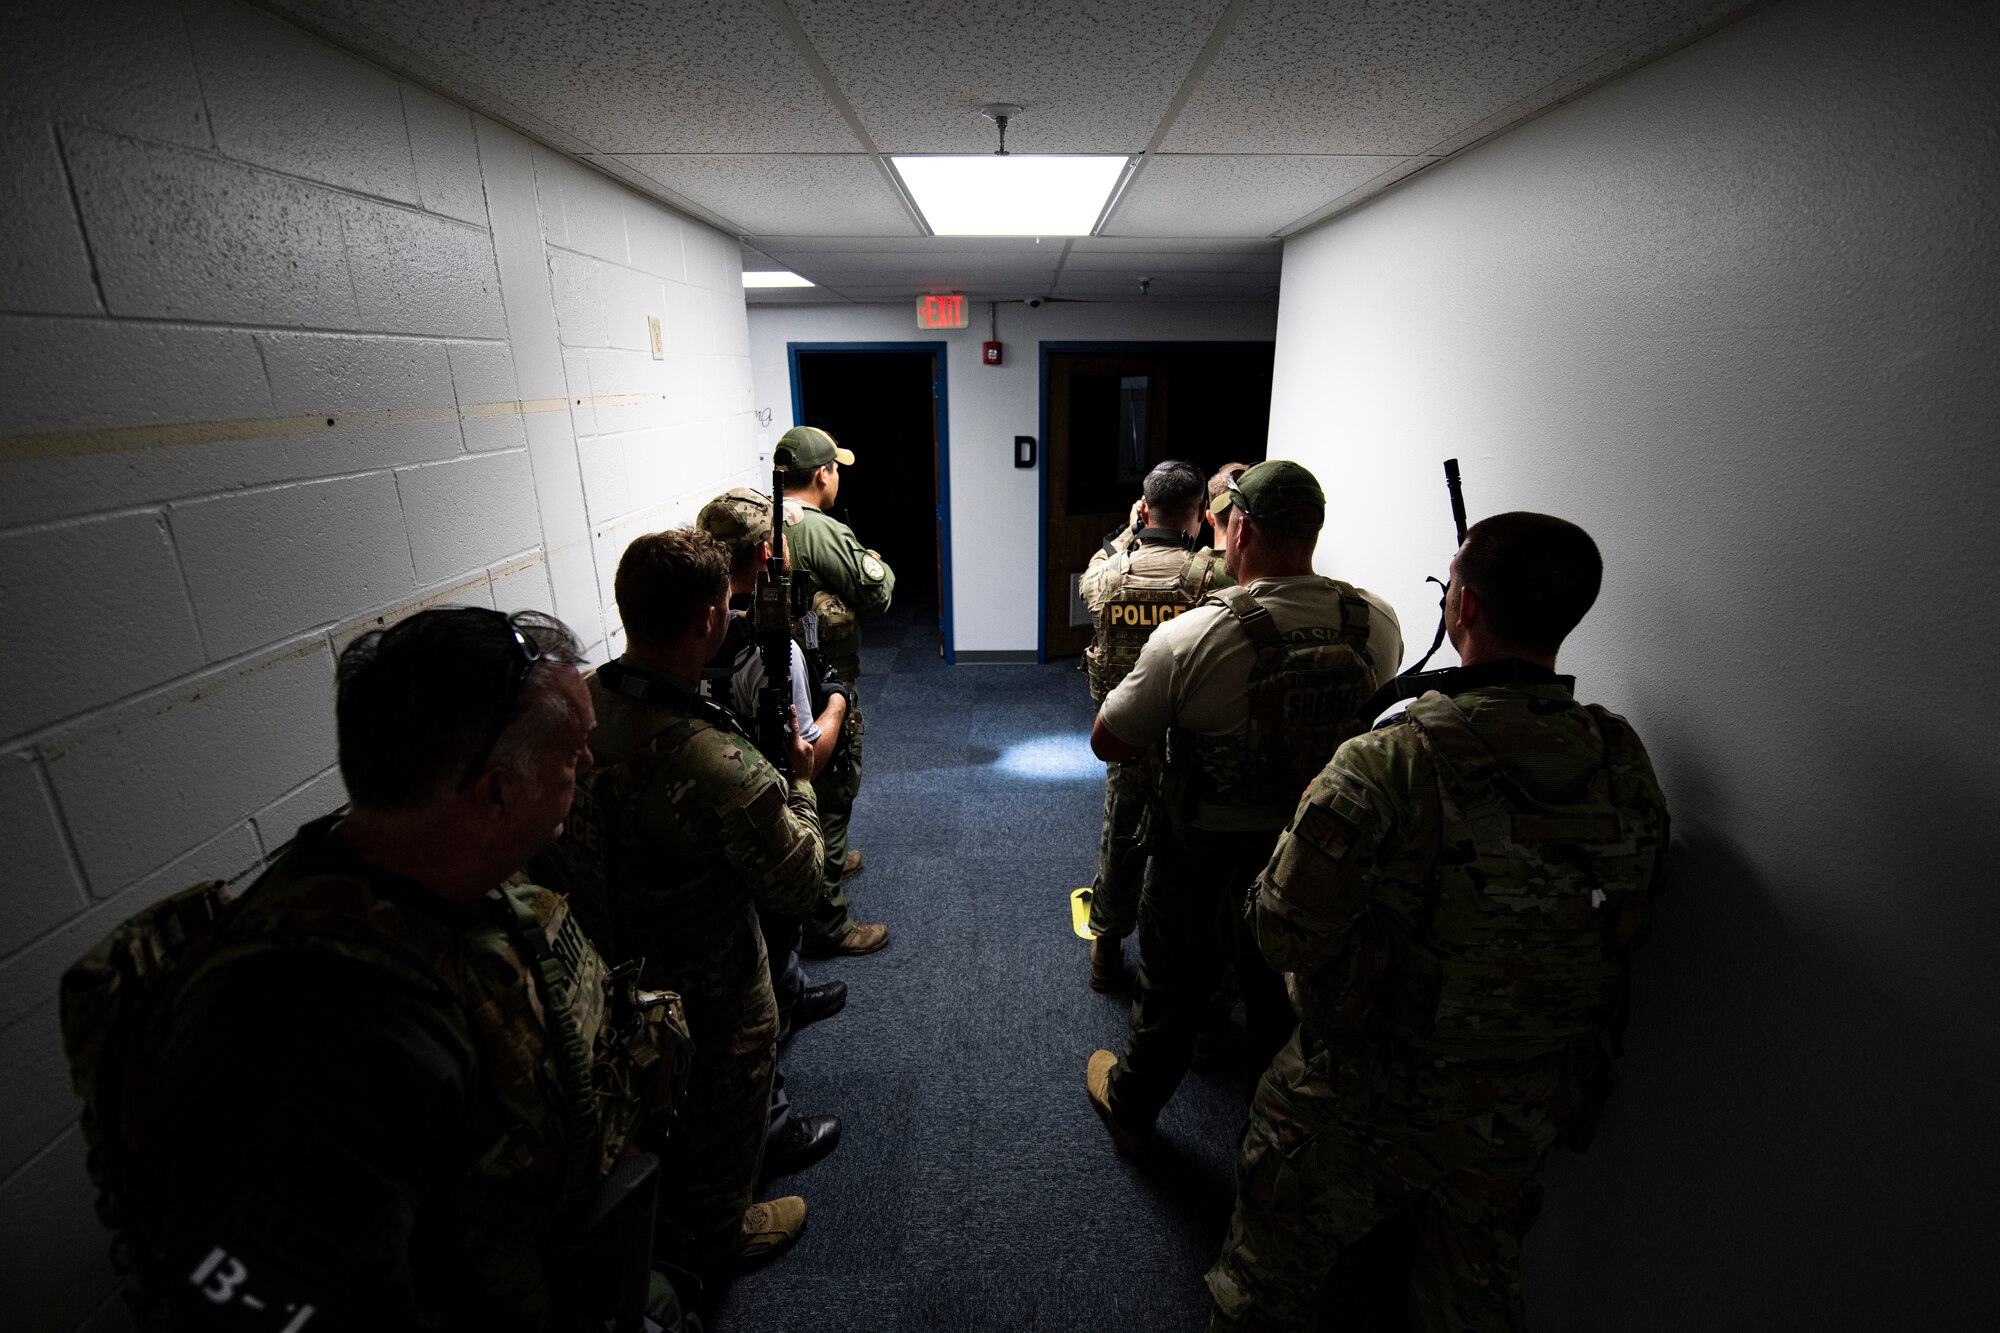 Members of the Bay County Sheriff’s Office special weapons and tactics team and 325th Security Forces Squadron tactical response team stack up in a hallway during a training exercise in Panama City, Florida, July 13, 2021. Simulated suspects were hidden throughout the building requiring the SFS and BCSO teams to work together to safely and efficiently find them. (U.S. Air Force photo by Staff Sgt. Stefan Alvarez)